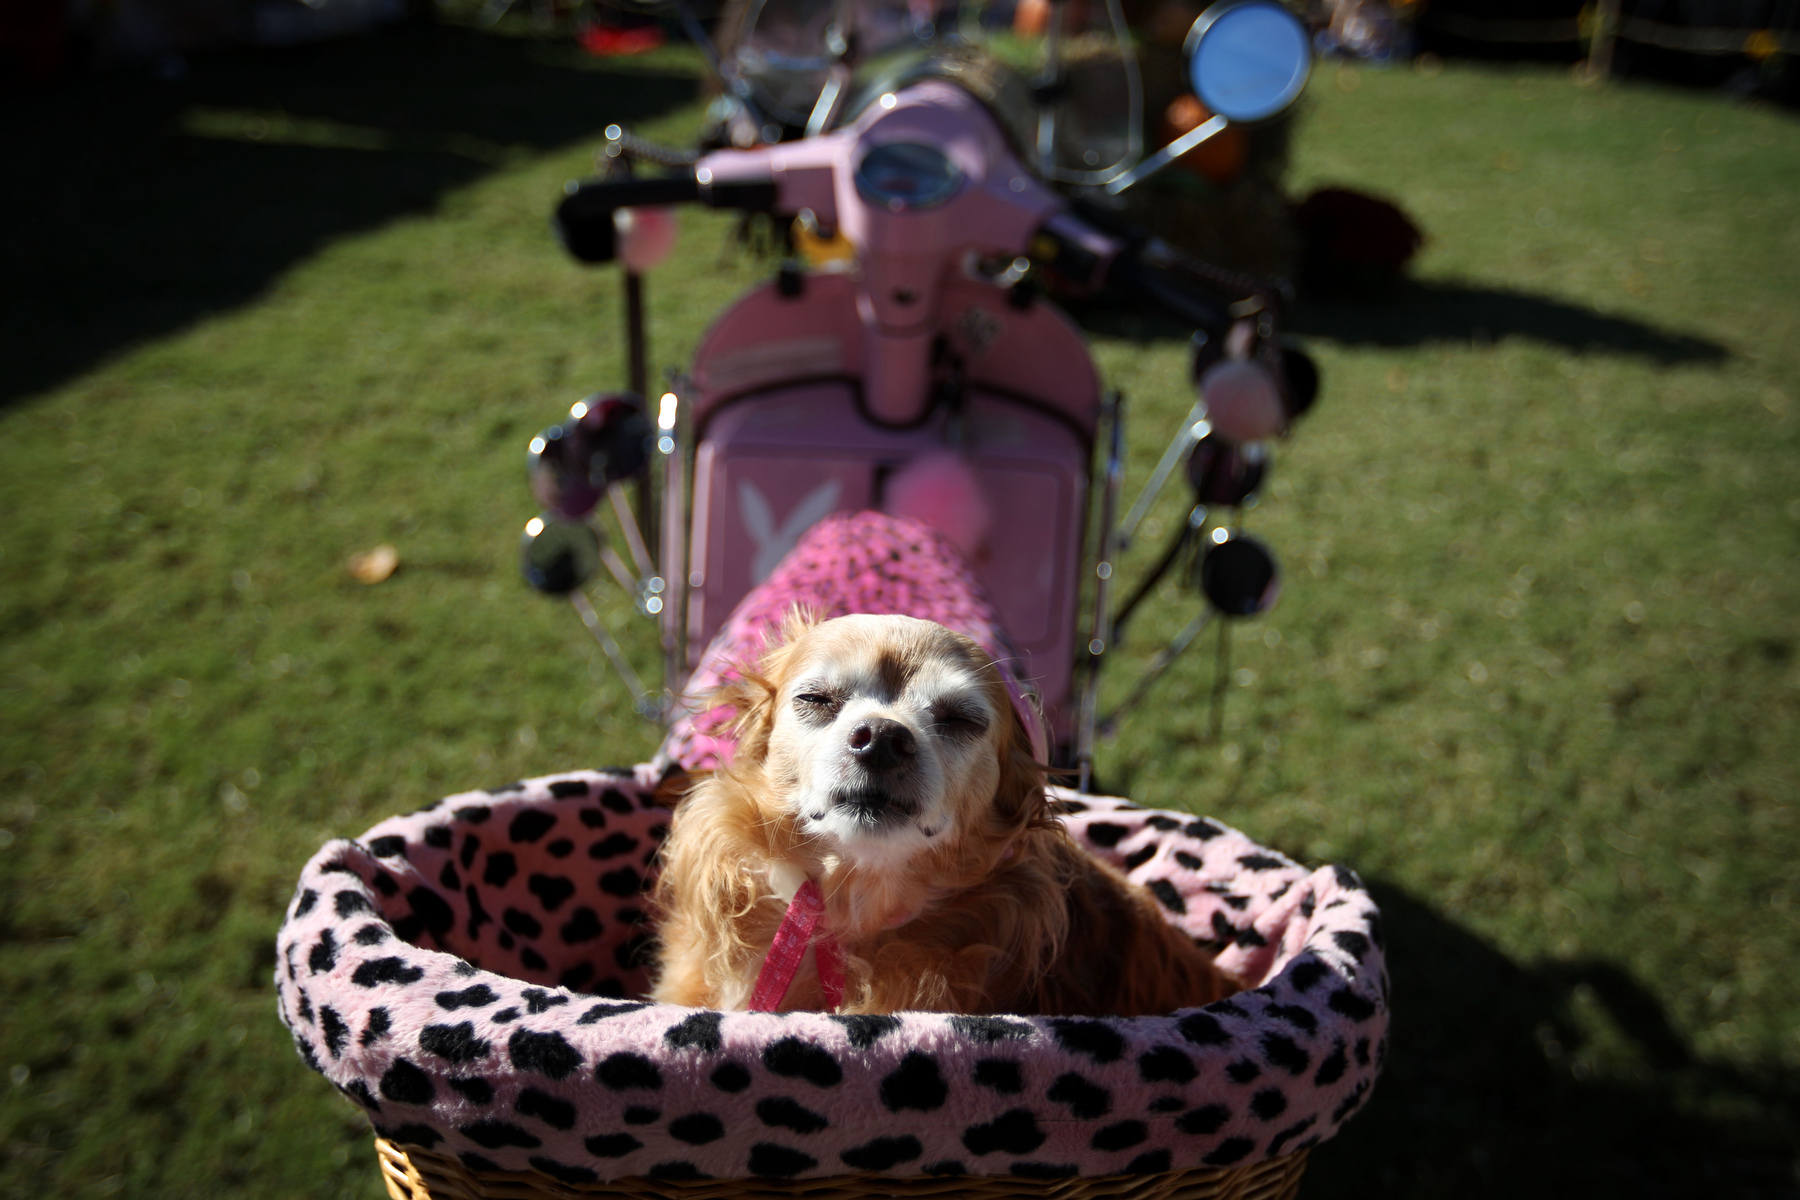 November 8, 2015 - Mozart the chihuahua sits in the basket of a Vespa scooter after competing in a lip synching contest with owner Pam Mackey during the 12th annual Harbor Town dog show. Pets and their owners competed in a variety of events including least obedient, most glamorous, best rescue dog, best costume, tail wagging, best trick and best float along with silent auctions with all proceeds from the event benefitting the Humane Society of Memphis and Shelby County. (Mike Brown/The Commercial Appeal)